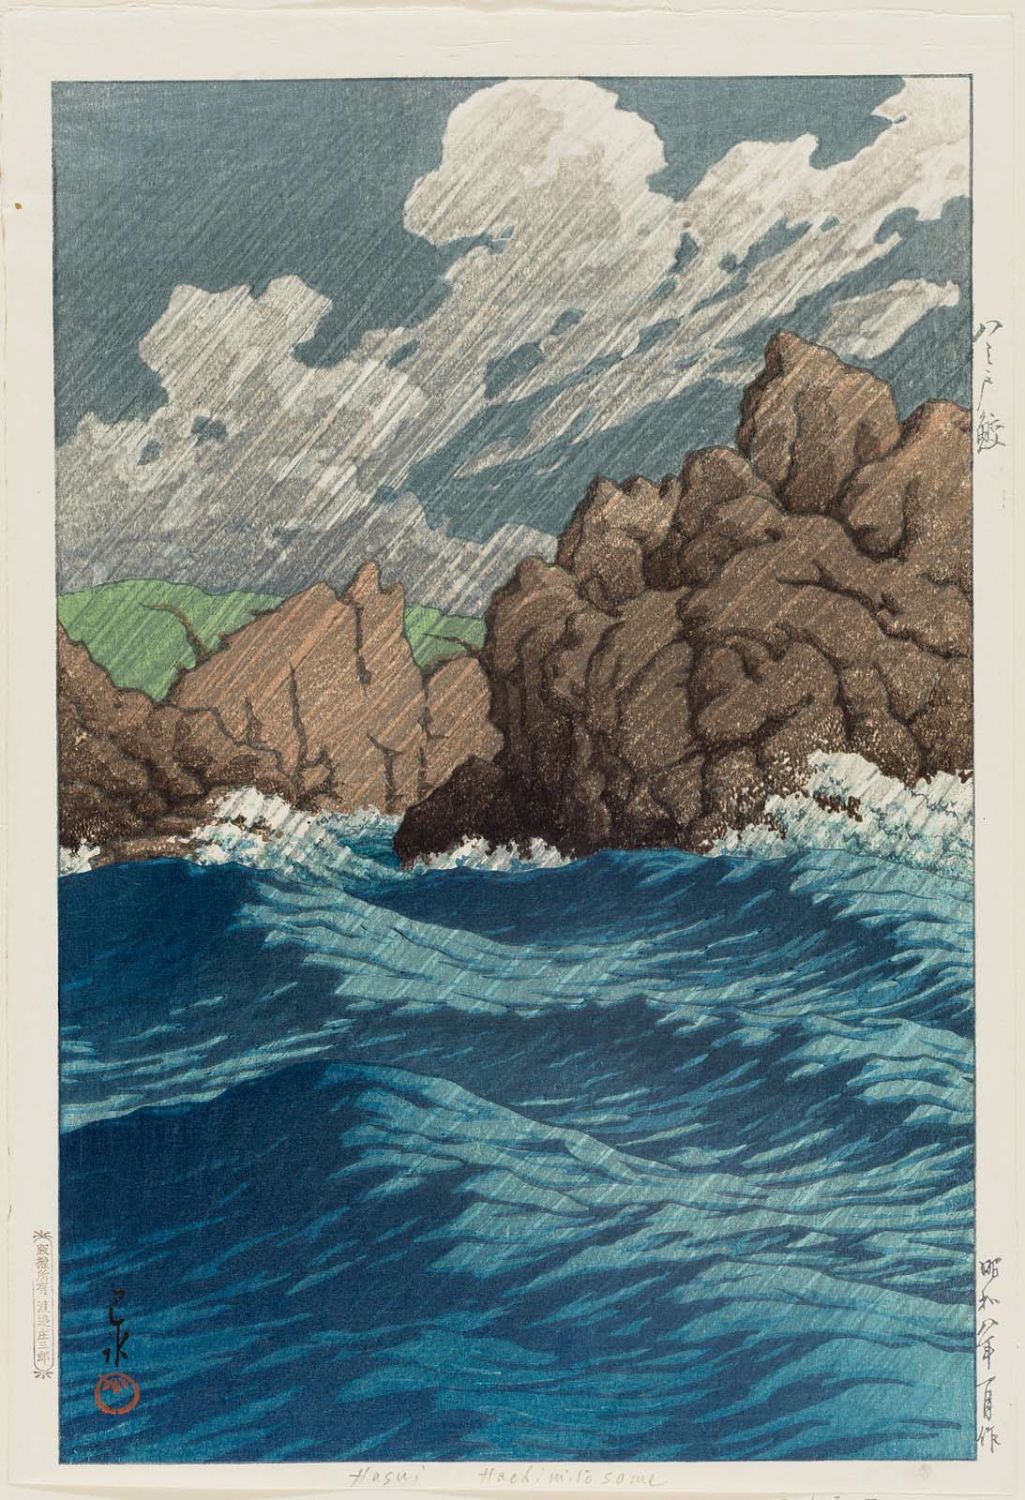 Kawase Hasui: Hachinohe-Same, from the series Collected Views of Japan ...